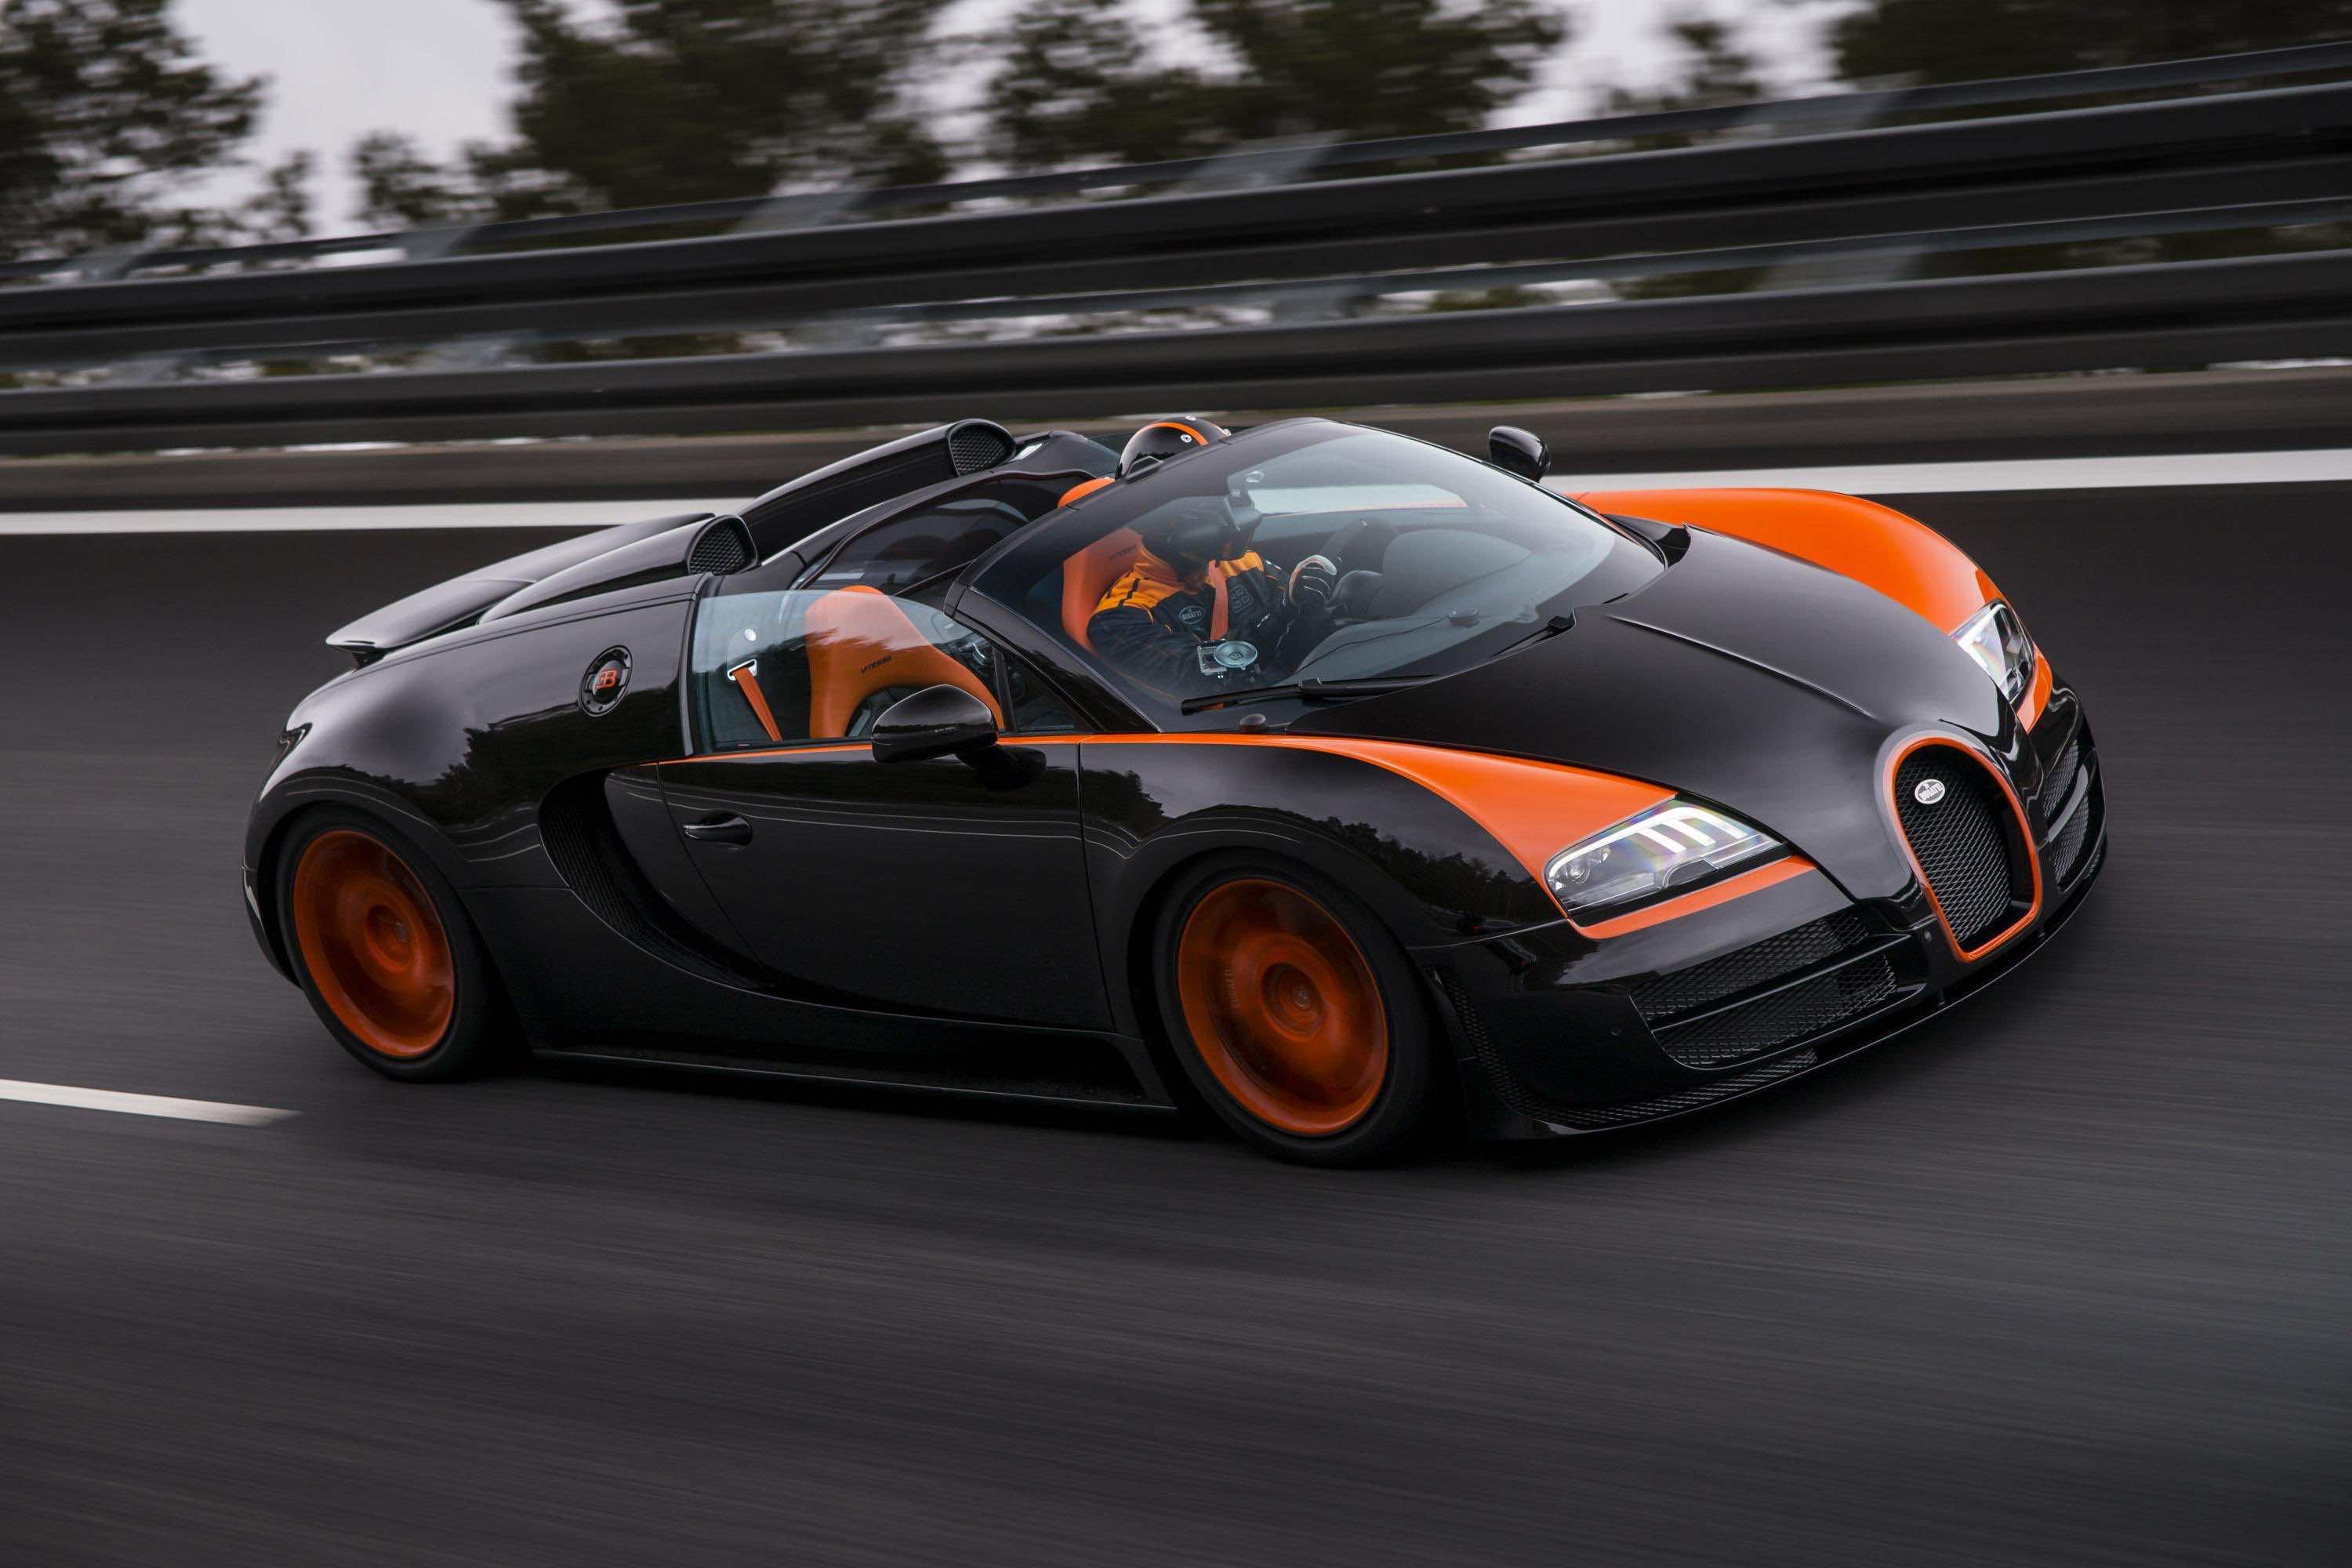 HD Bugatti Wallpapers For Free Download